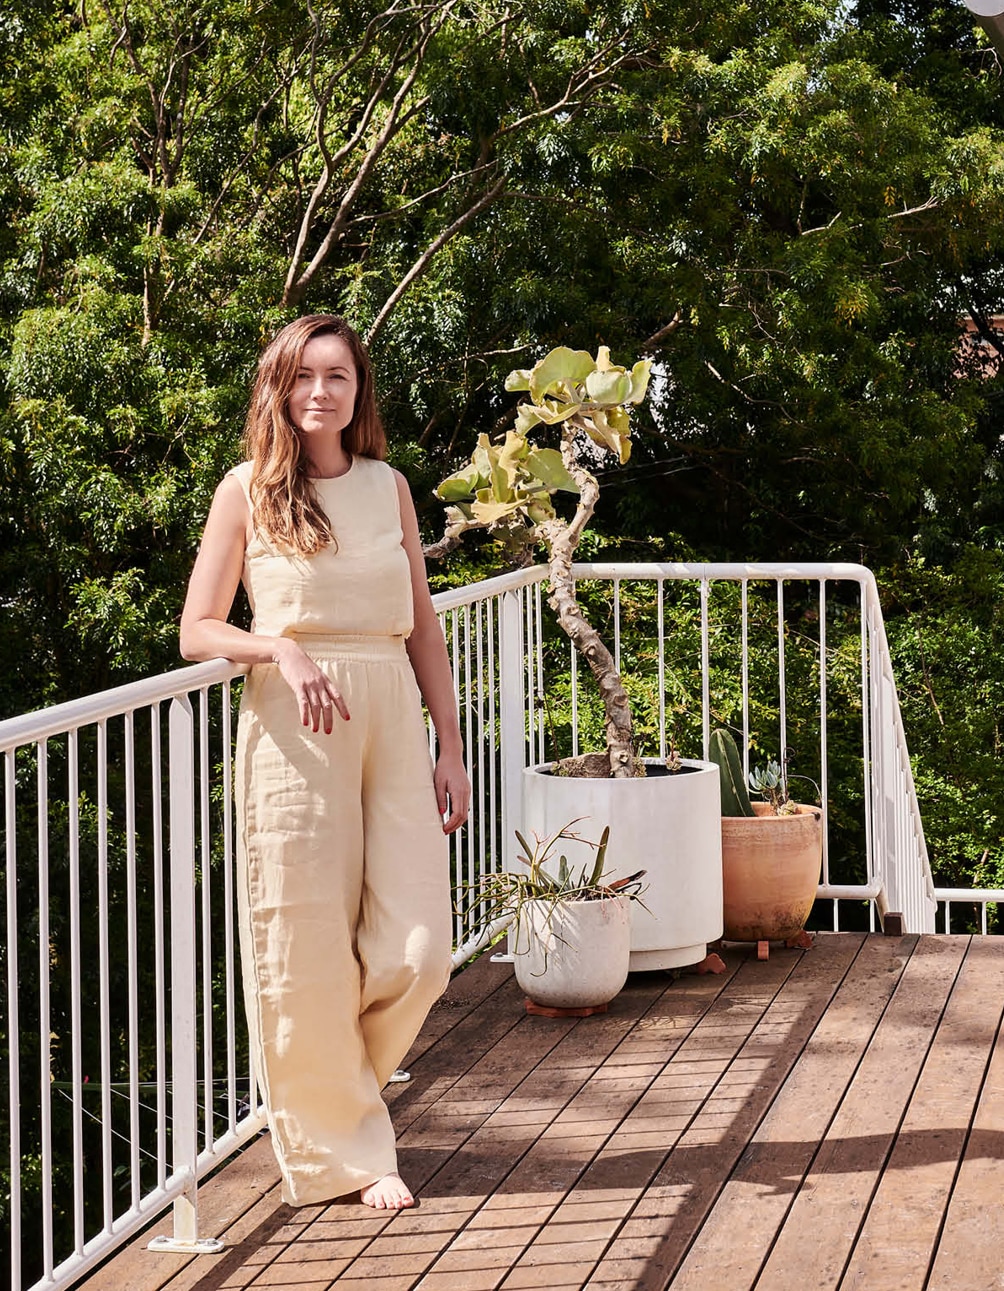 portrait image of xanthe standing on her balcony, resting arm on railing. she wears pastel yellow loungewear and smiles softly at camera. gumtrees and bushland are seen behind her.